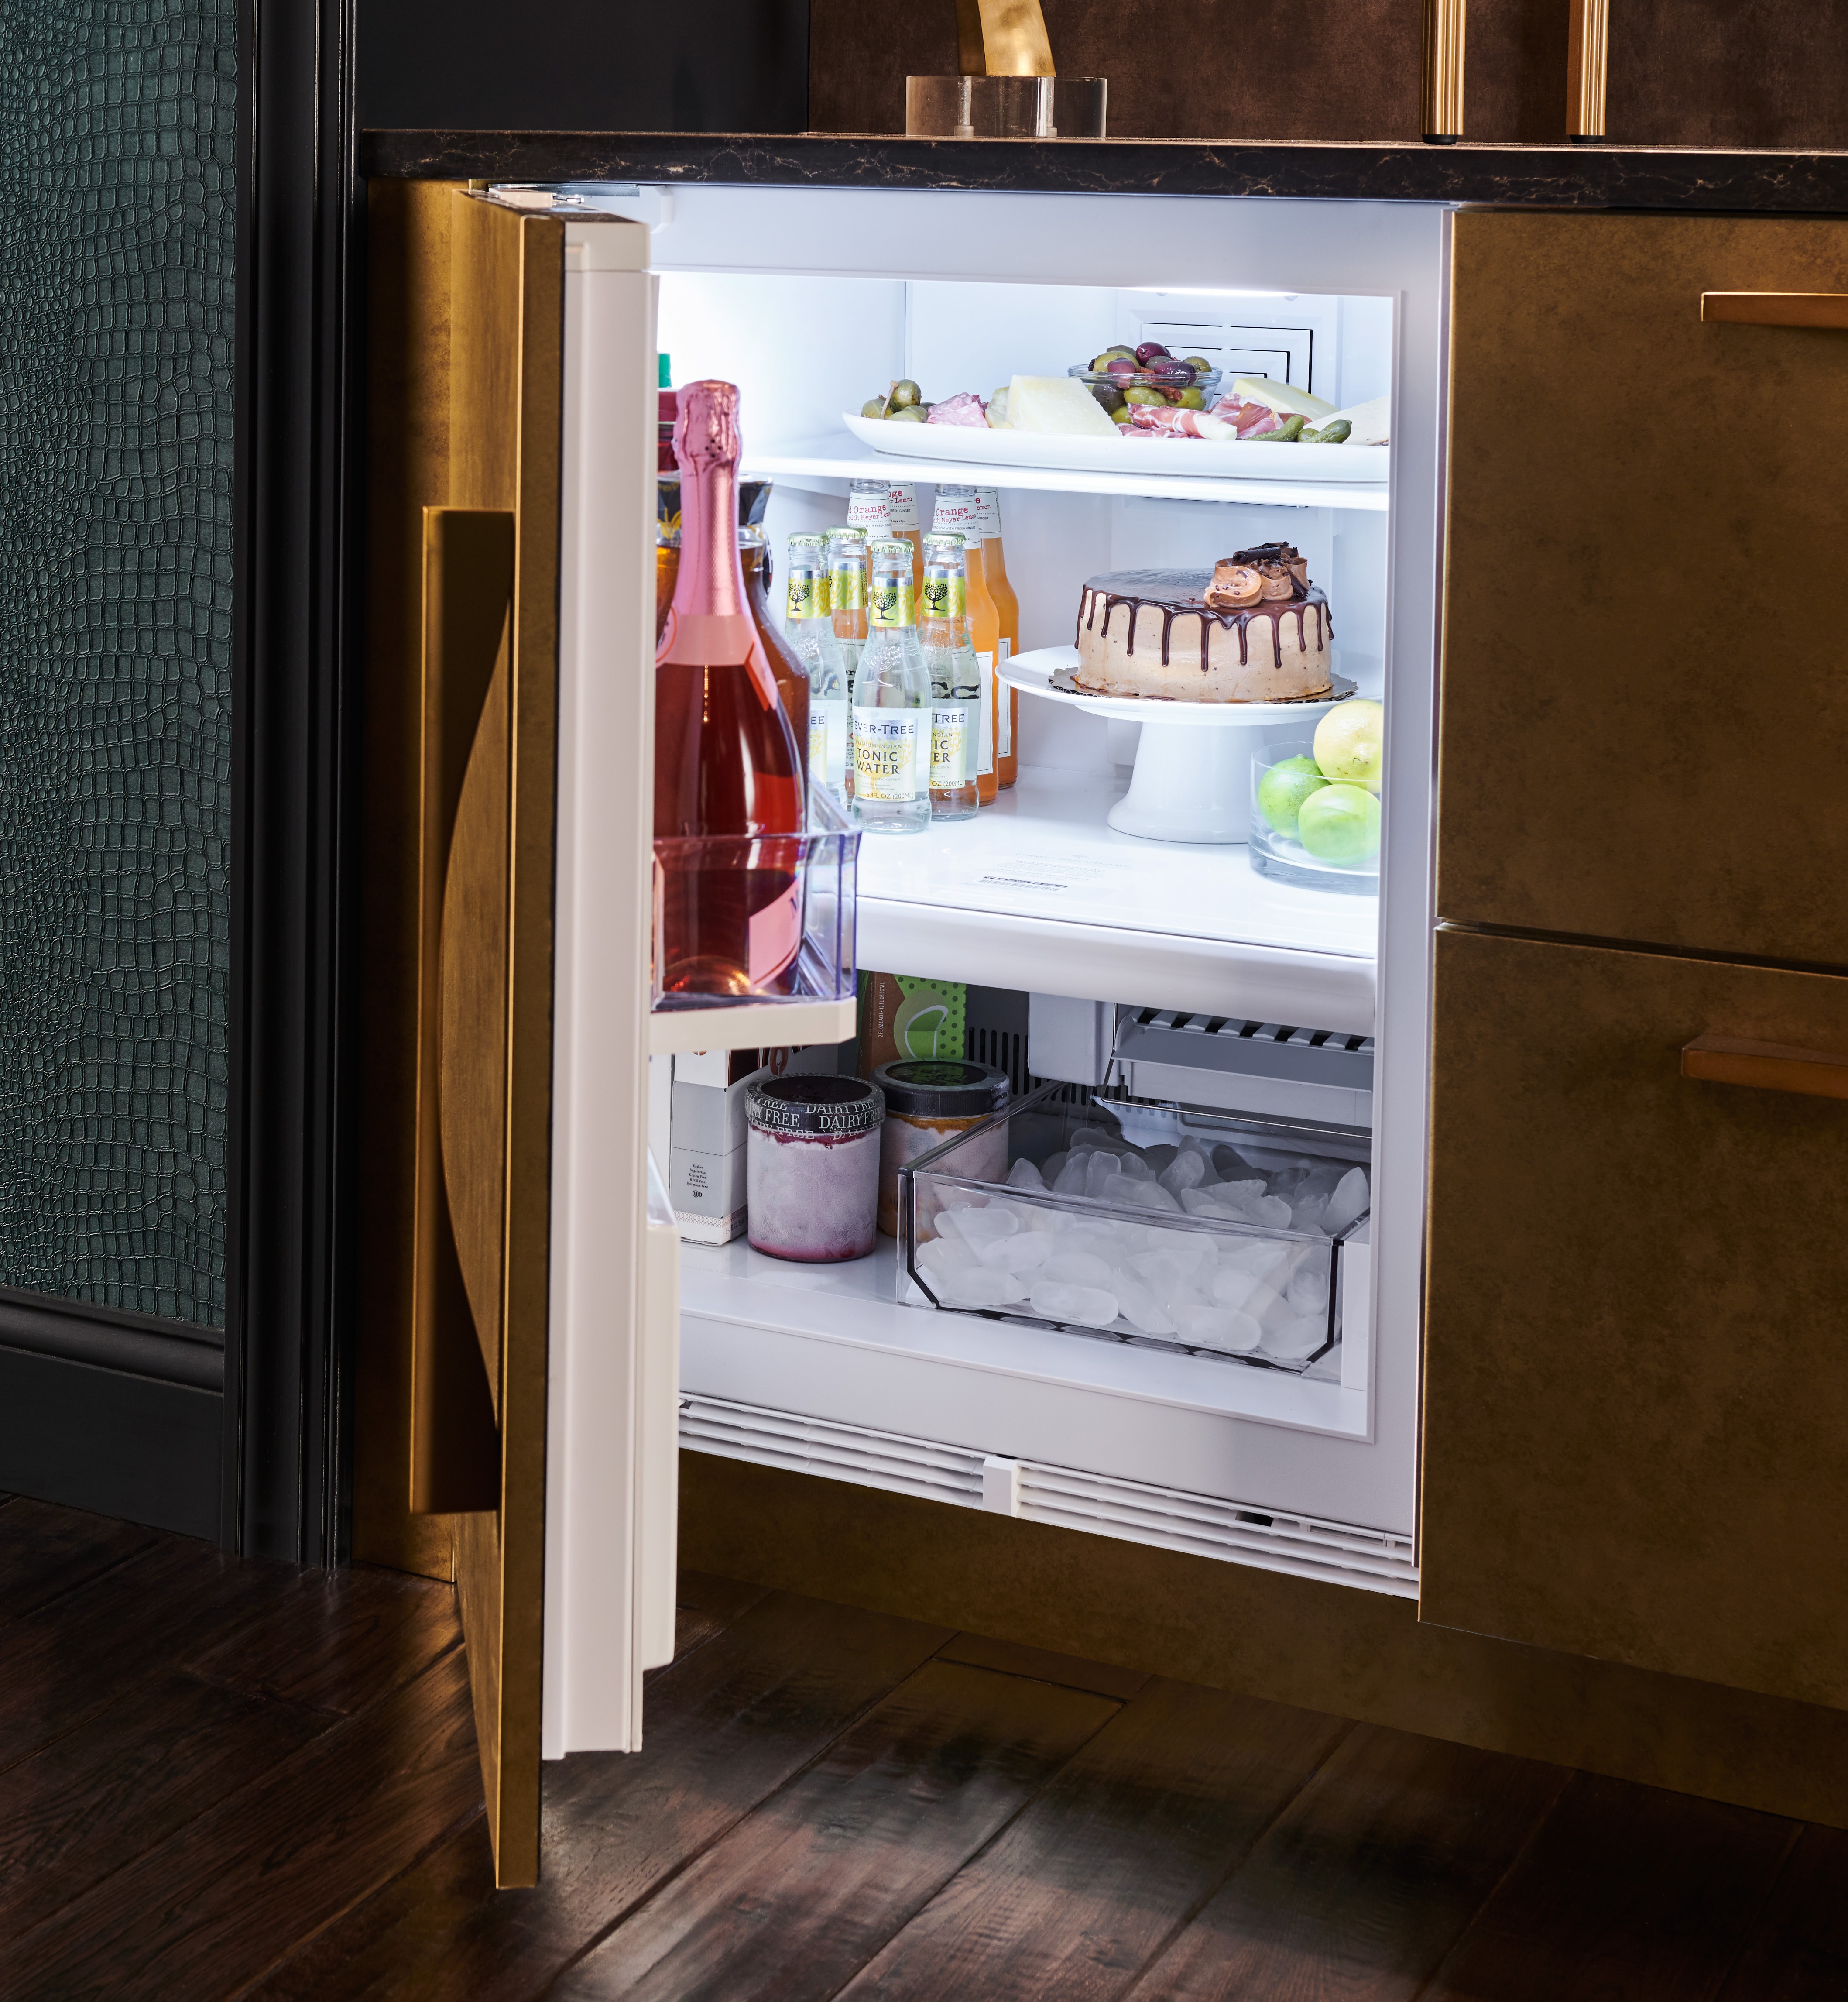 10 Easy Pieces: The Best Under-Counter Refrigerator Drawers